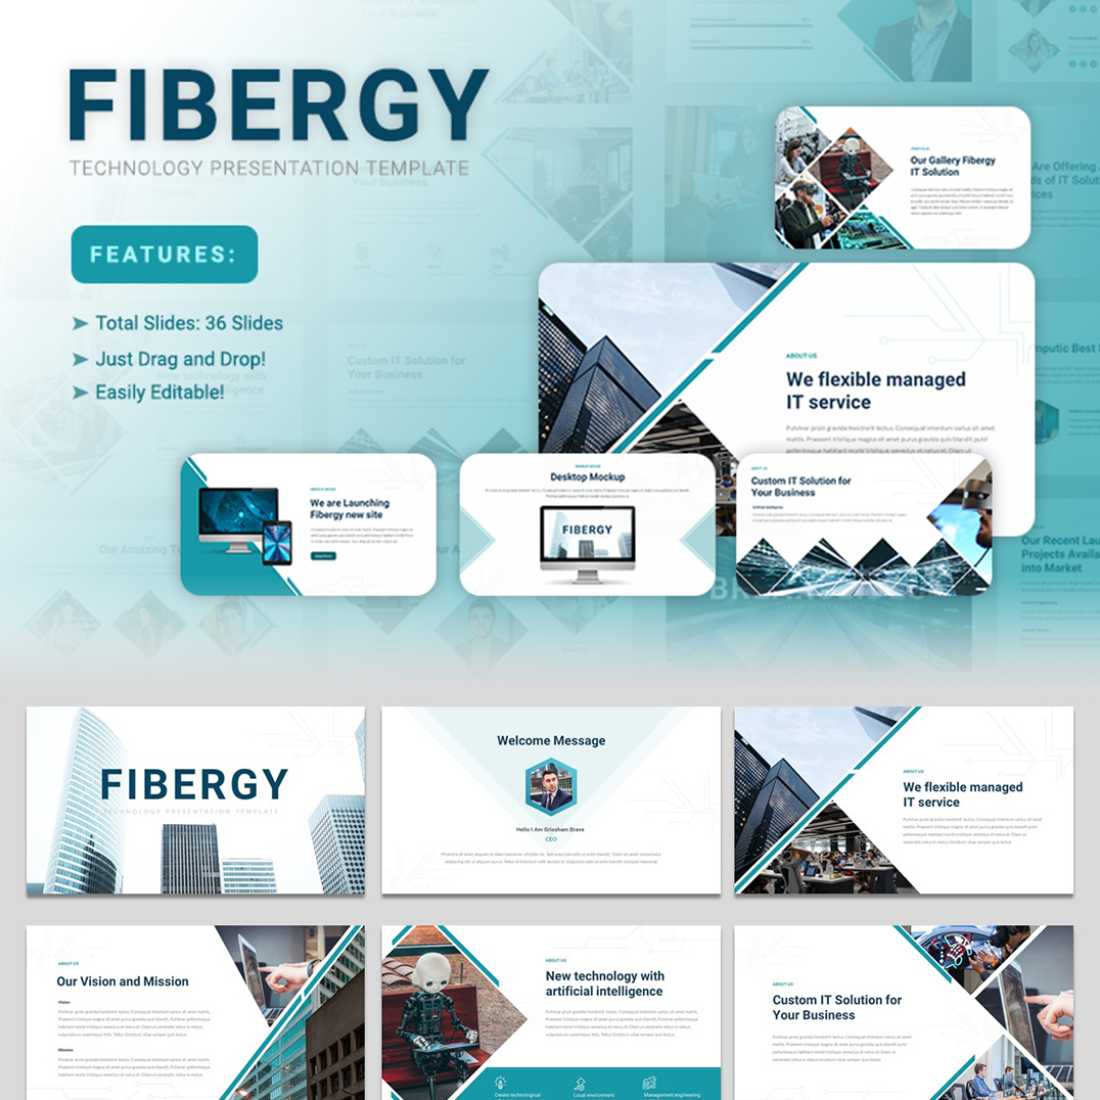 Fibergy - Technology Presentation PowerPoint Template preview image.